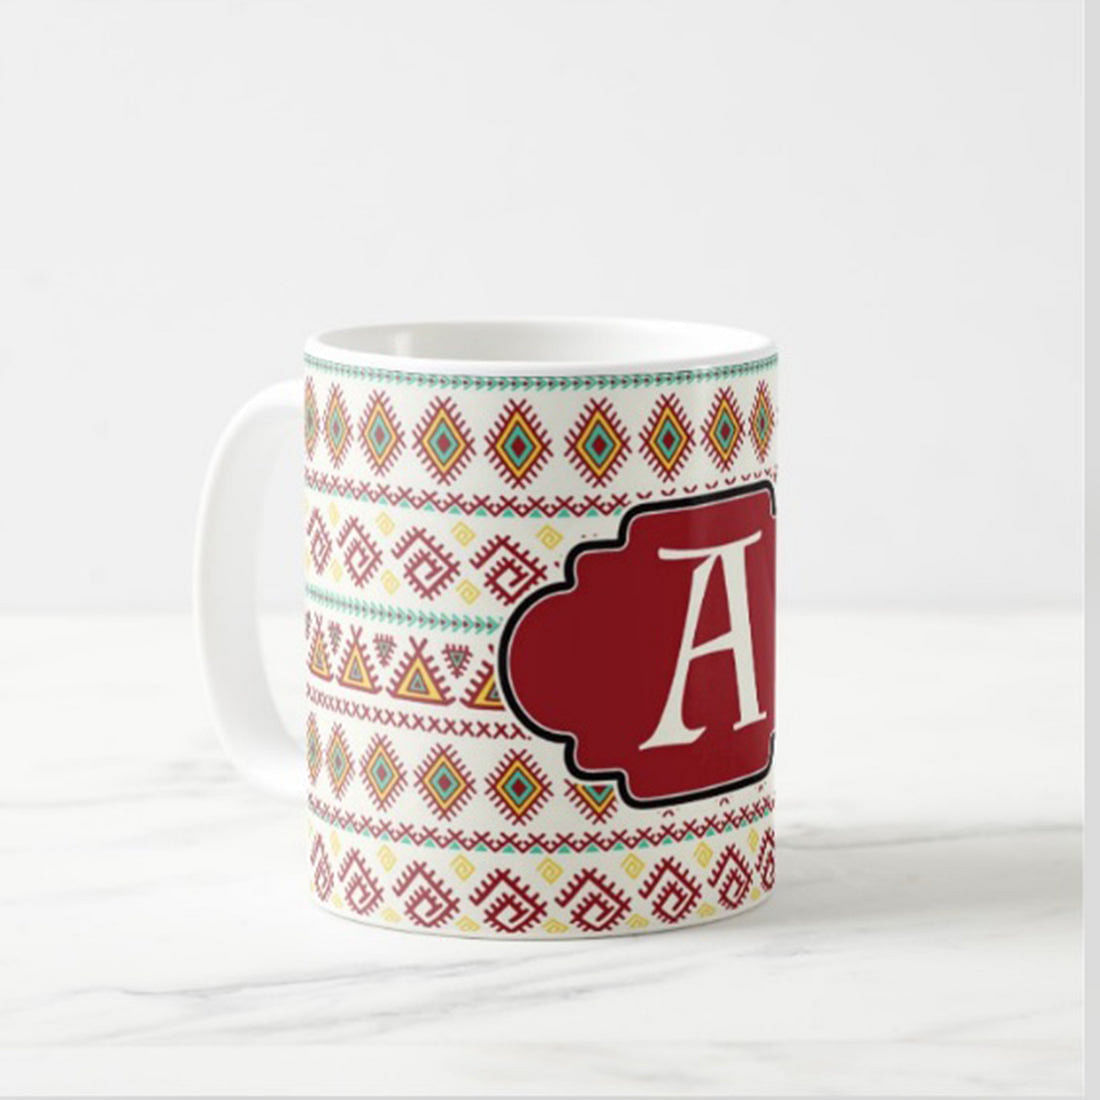 Personalized Printed Cups - Red Ethnic Nutcase